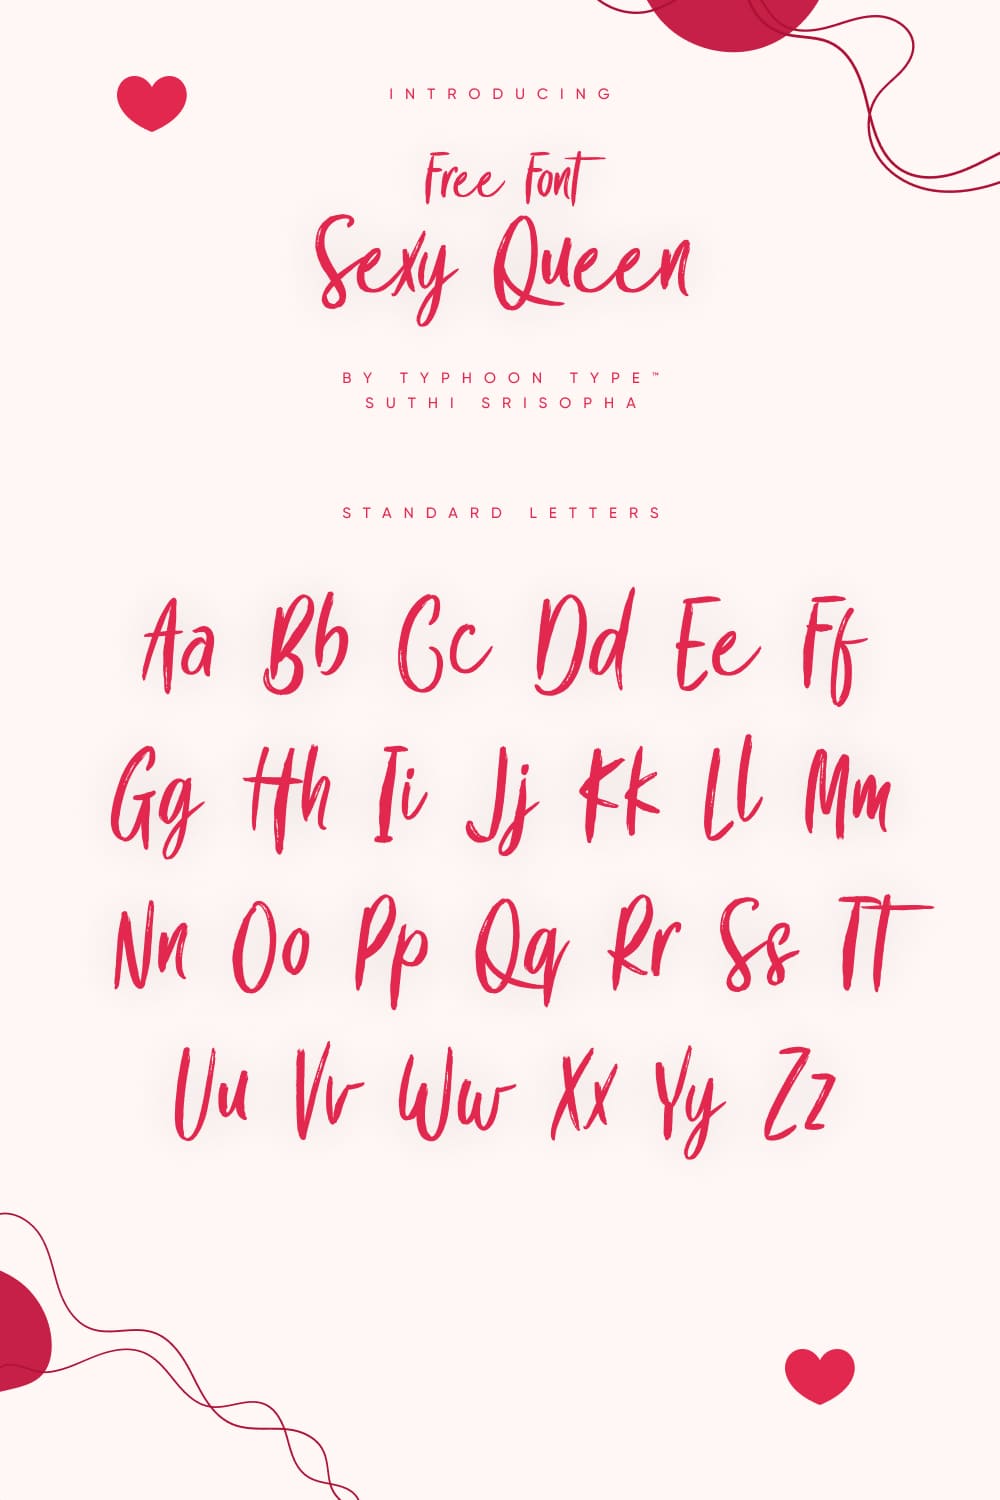 MasterBundles Pinterest Collage Image with Sexy Queen Free Font Standart Letters.